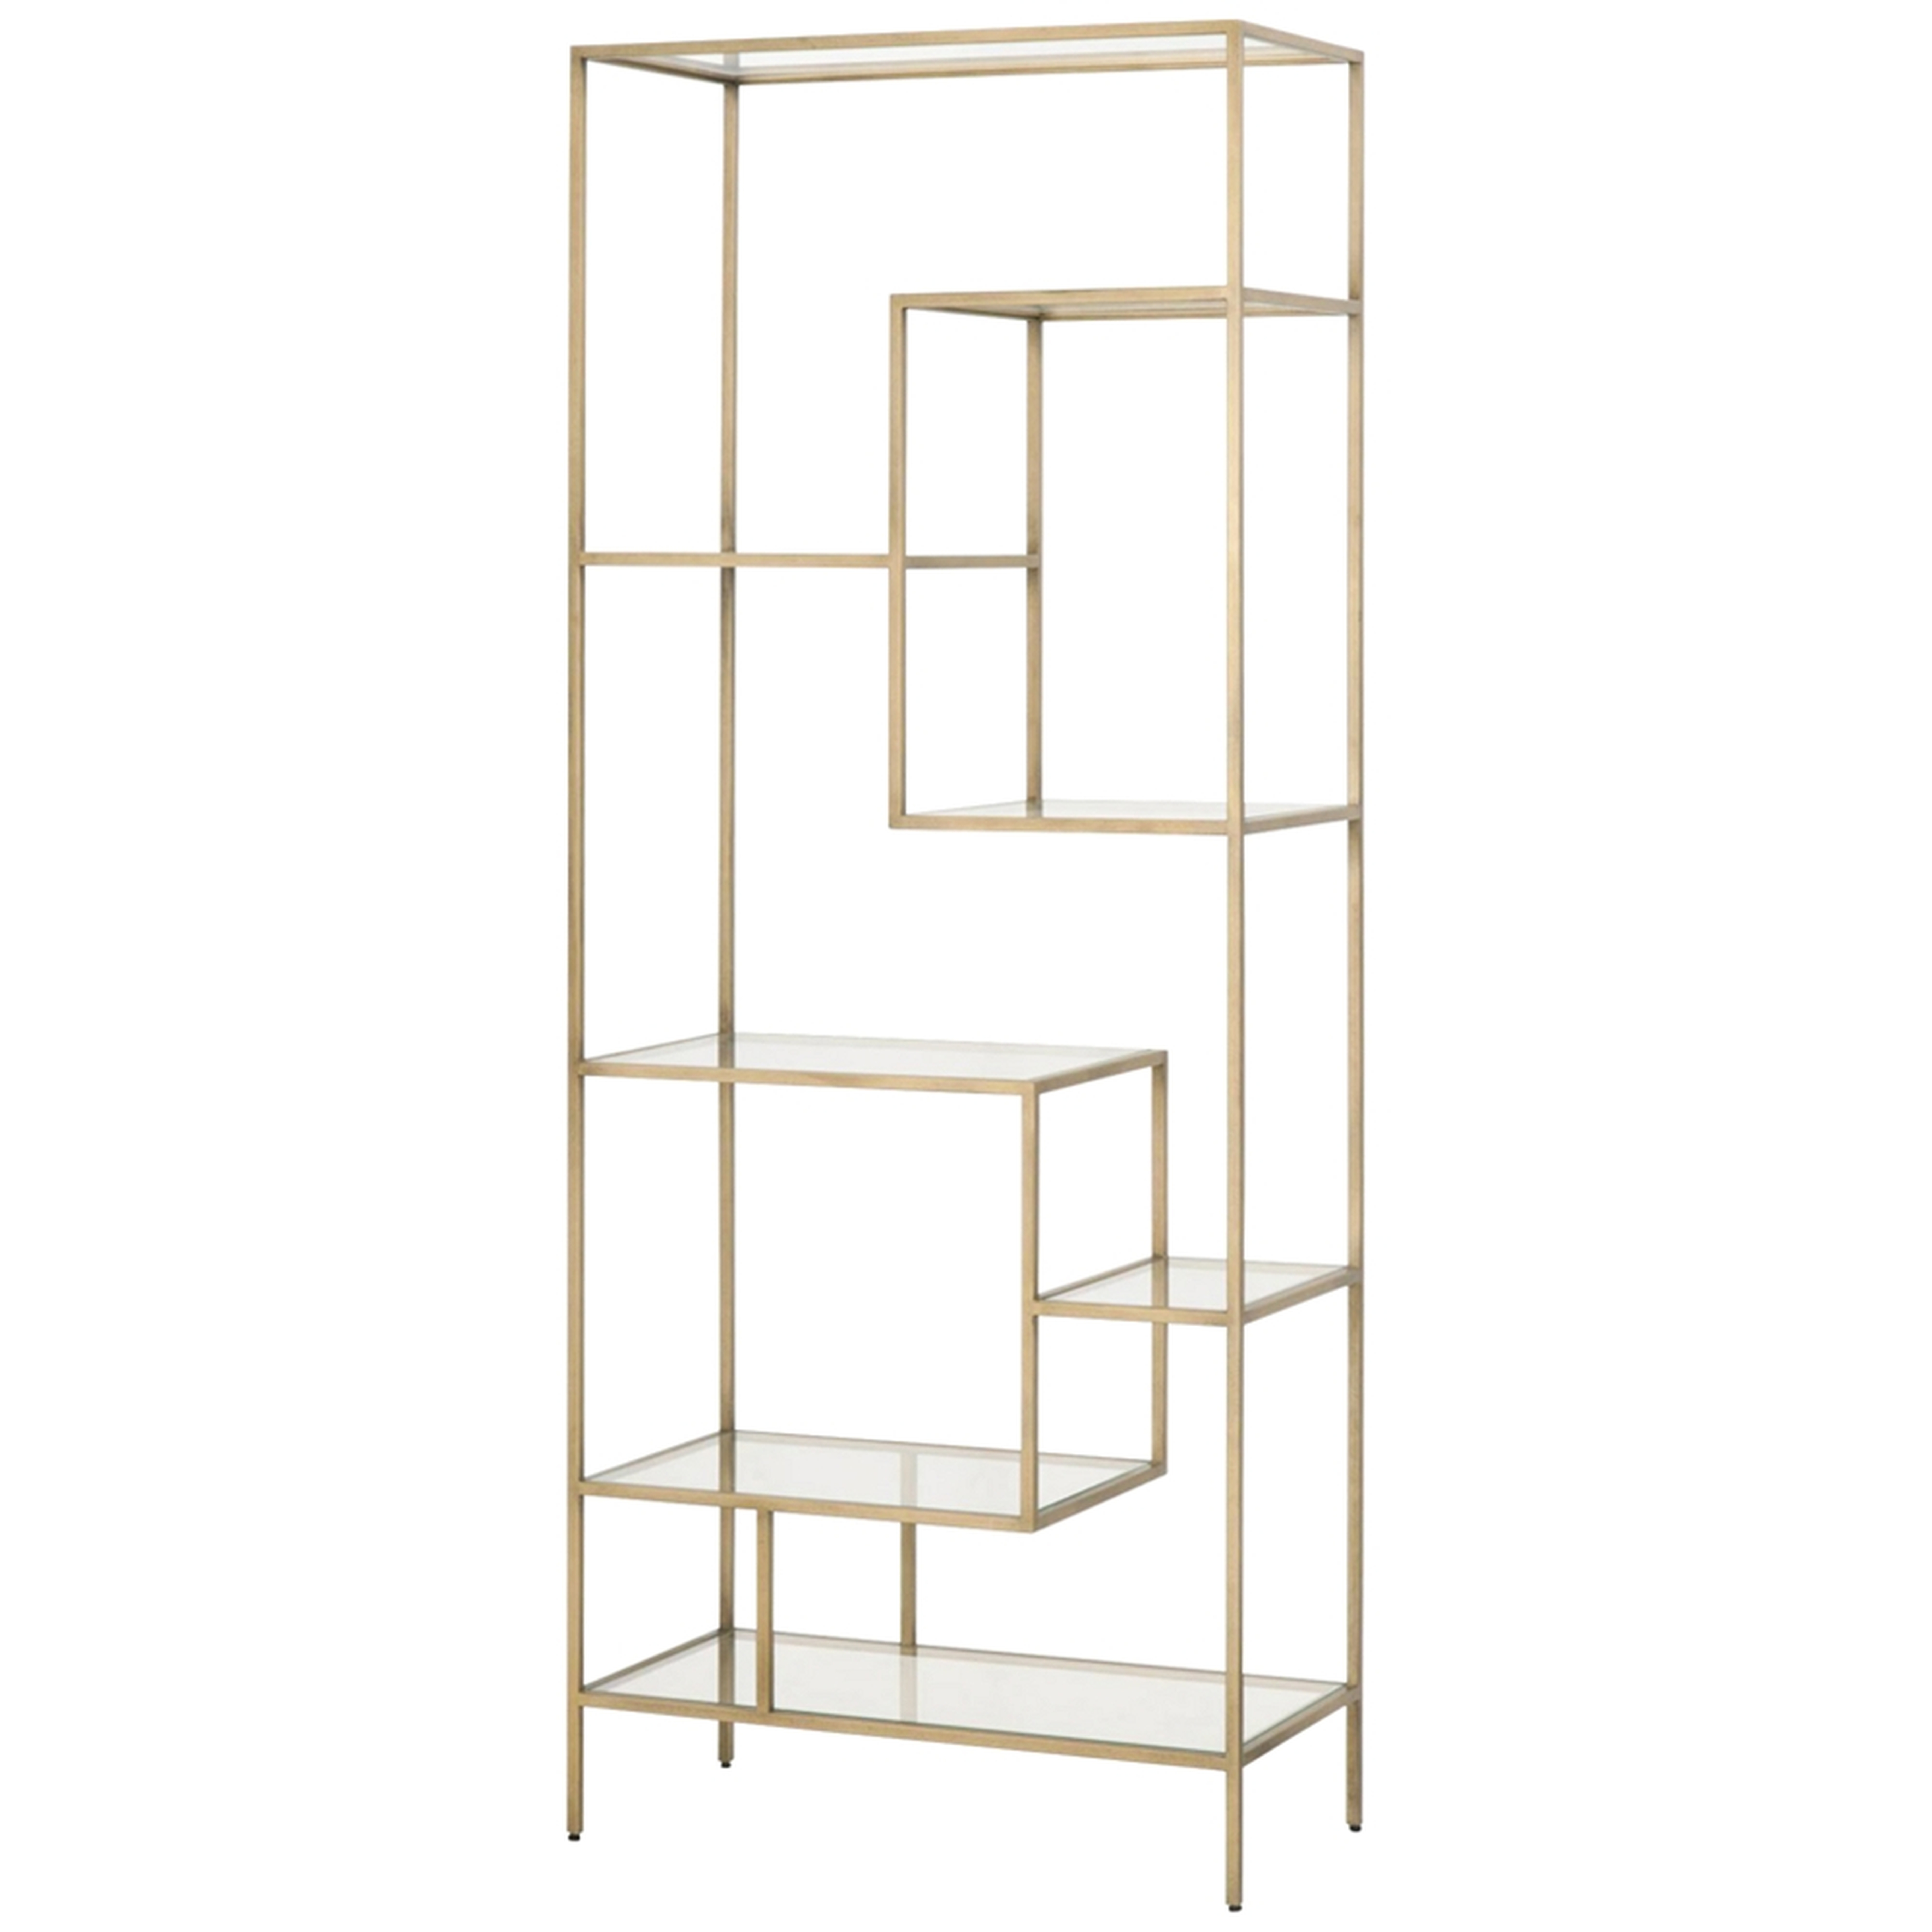 Beakman 31 1/2" Wide Brass Metal and Glass 7-Shelf Bookcase - Style # 86H88 - Lamps Plus